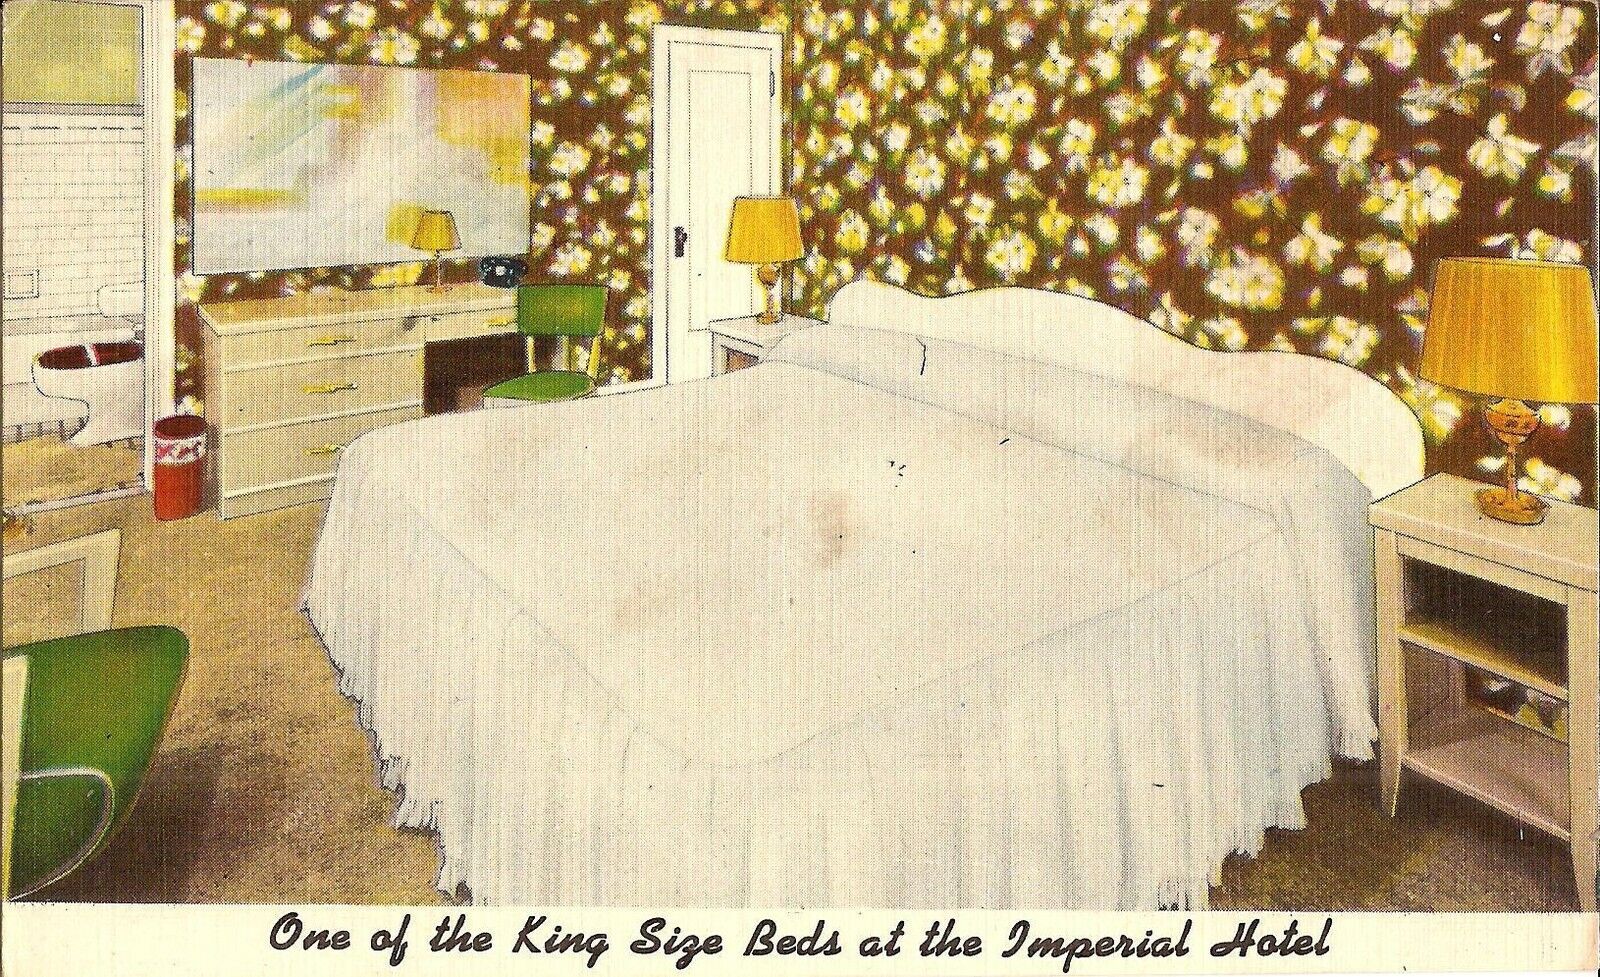 Portland, OREGON - Imperial Hotel - King Size Bed - ADVERTISING - LINEN